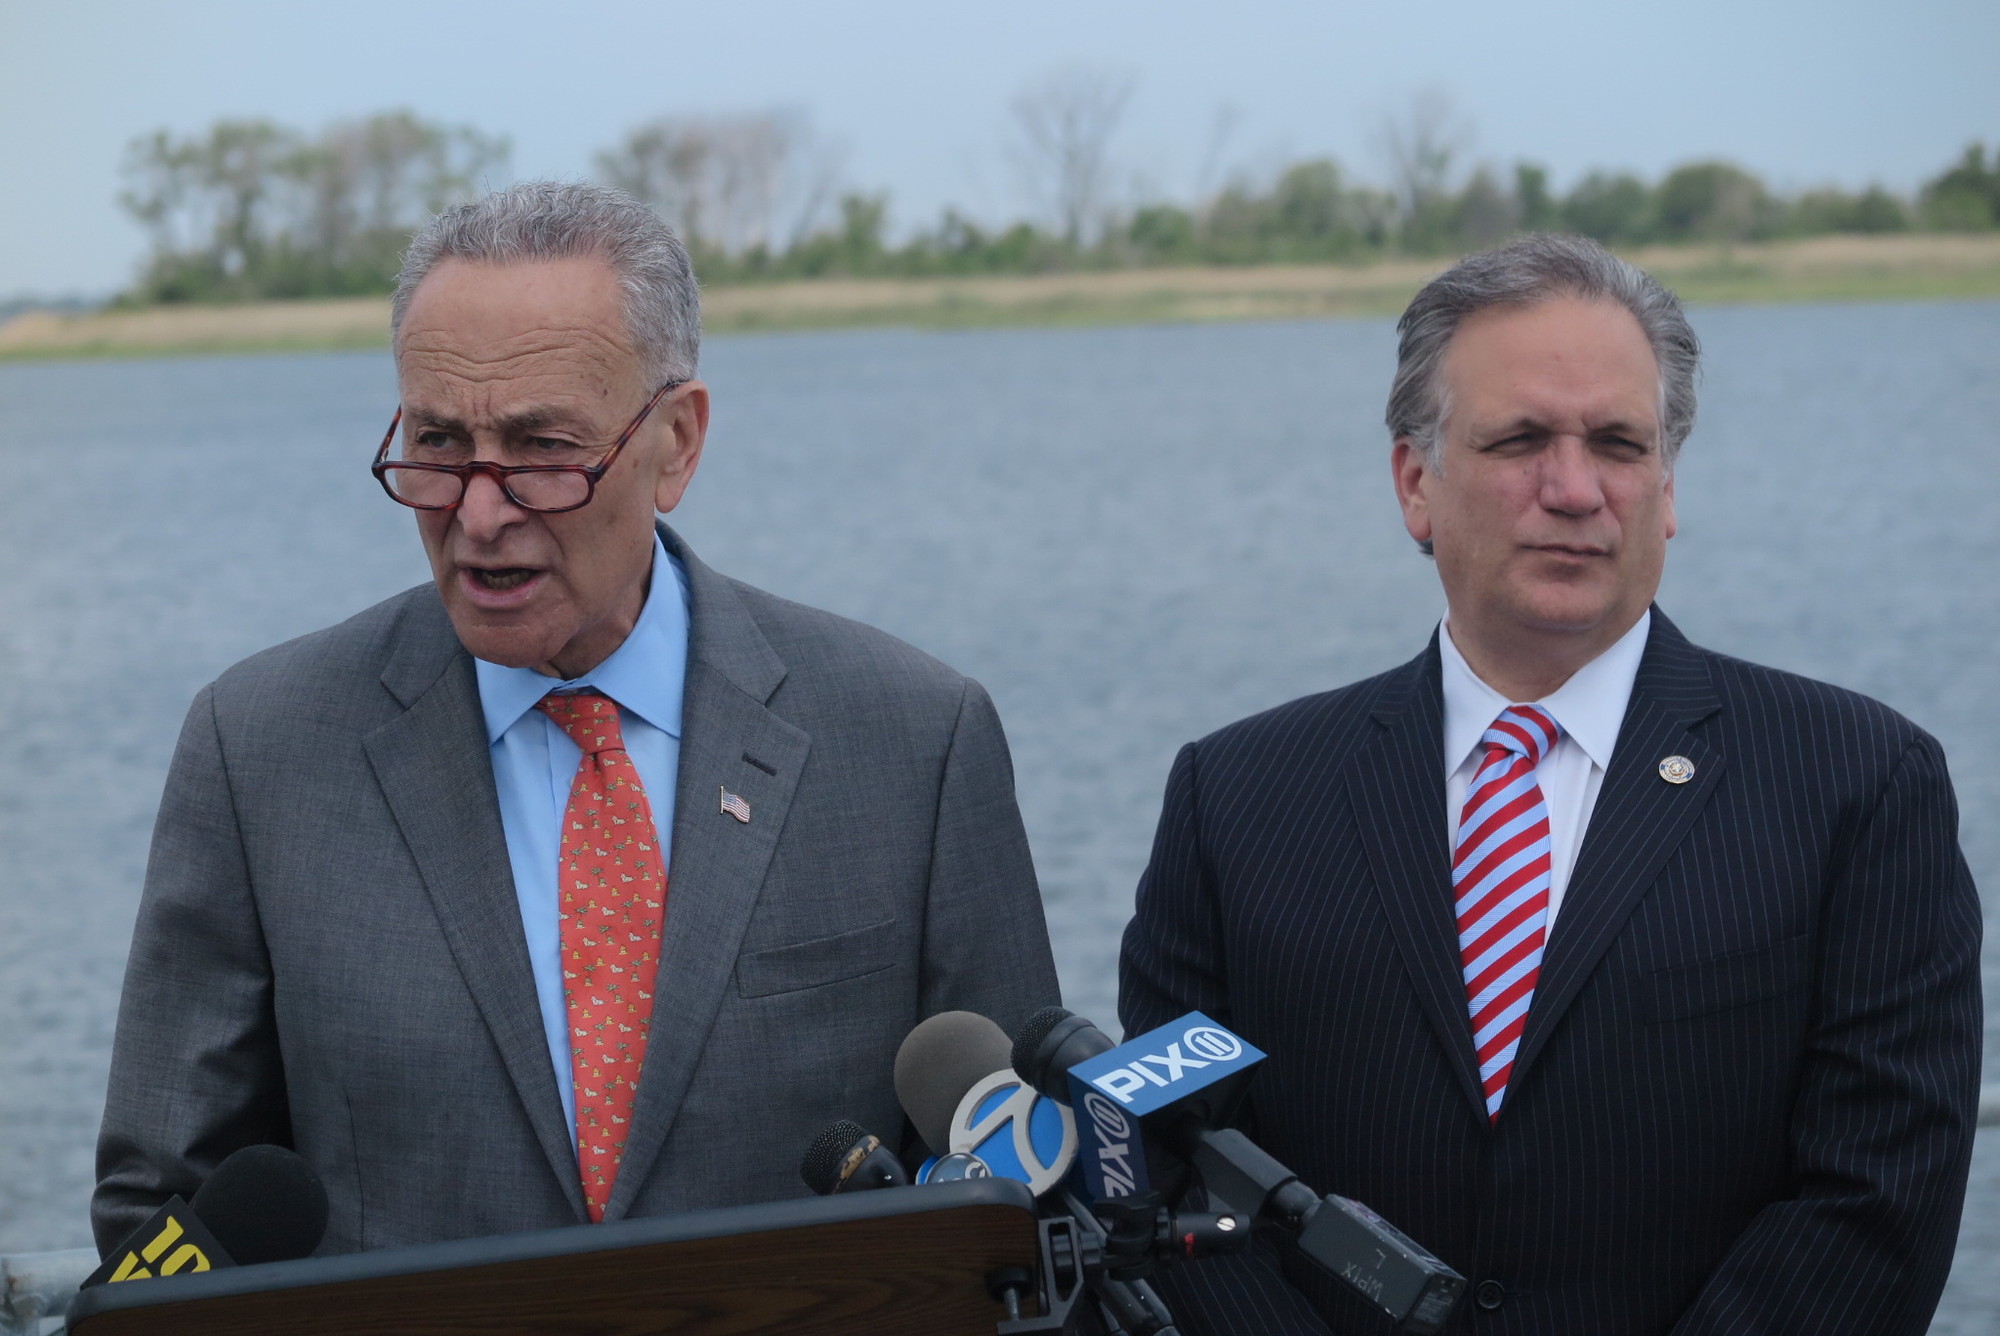 U.S. Sen. Charles Schumer, left, was joined by Nassau County Executive Ed Mangano on Monday when he called on Albany to allocate federal funding for a new outfall pipe for the Bay Park Sewage plant.